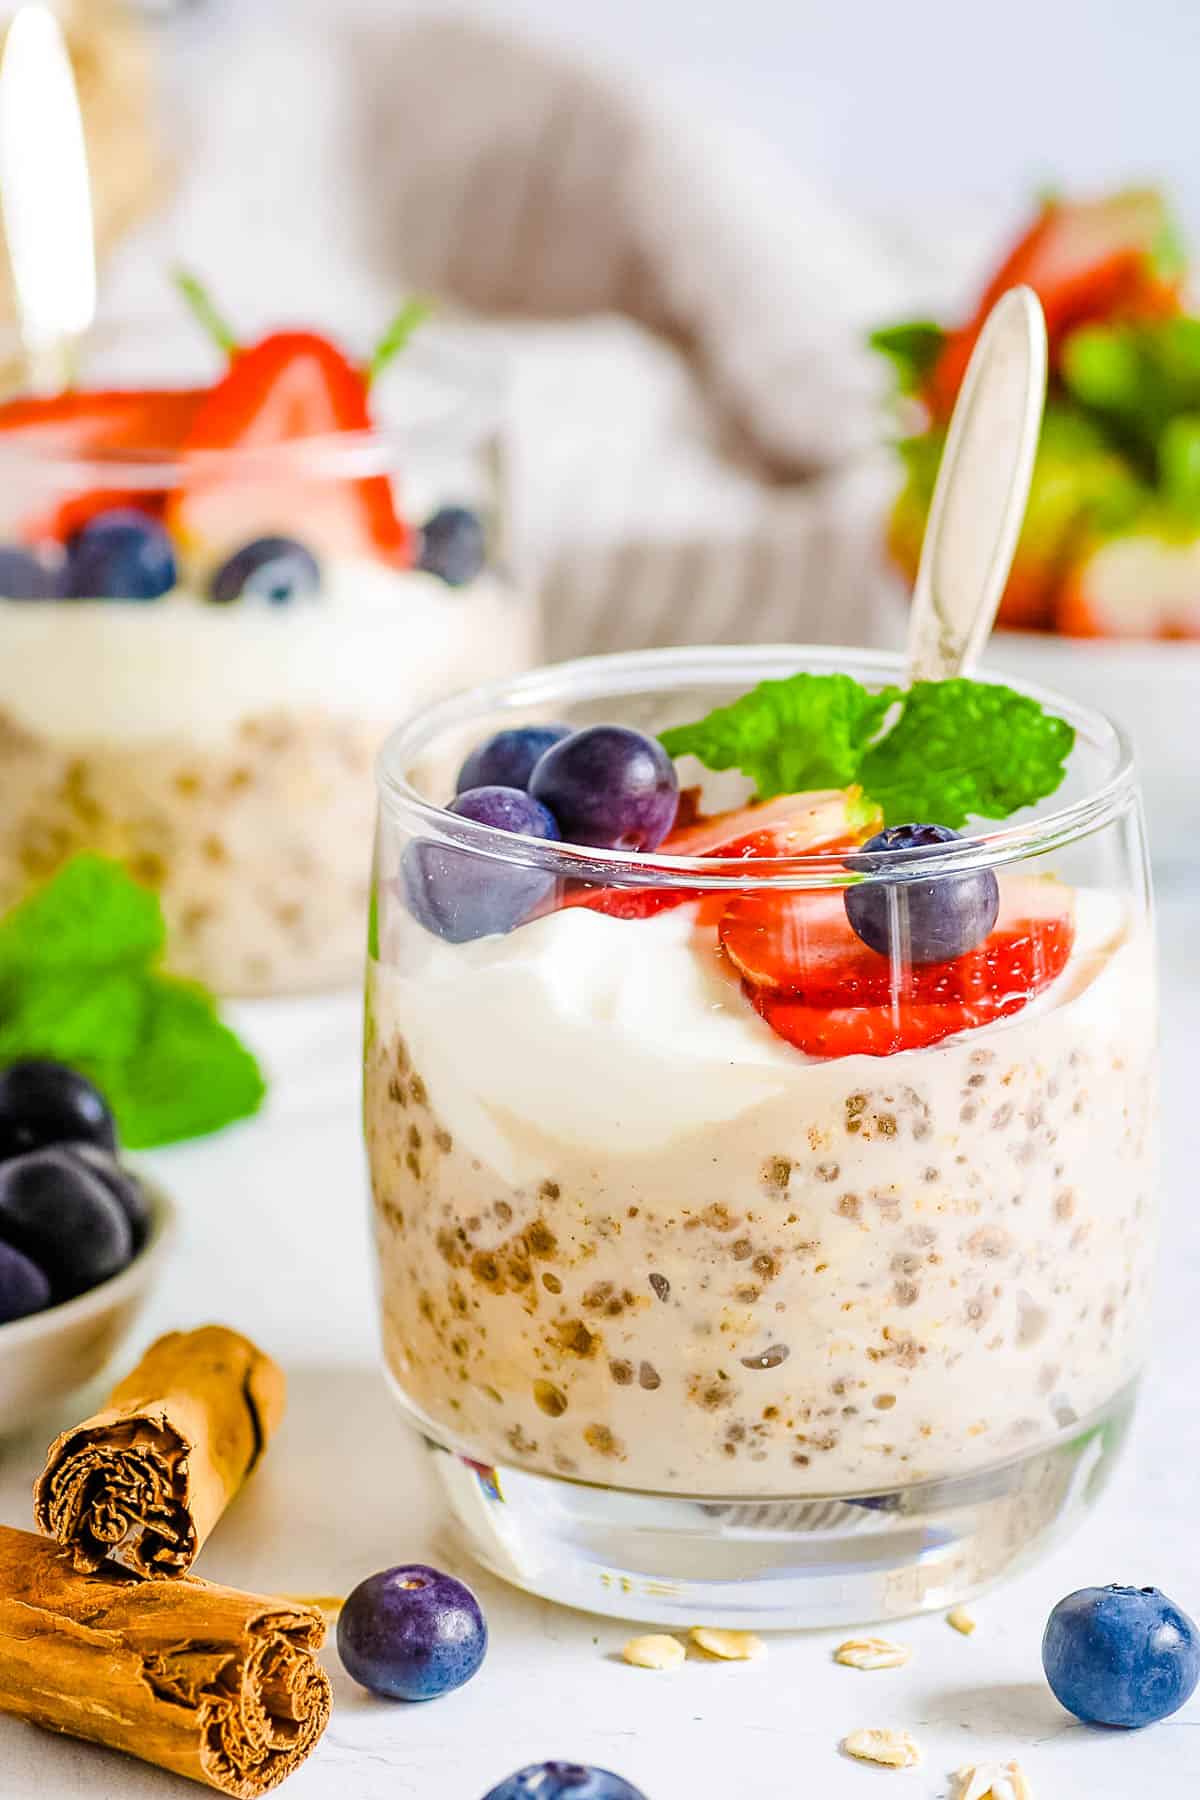 Vegan high protein overnight oats served in gl،es with fresh berries and mint as a garnish.